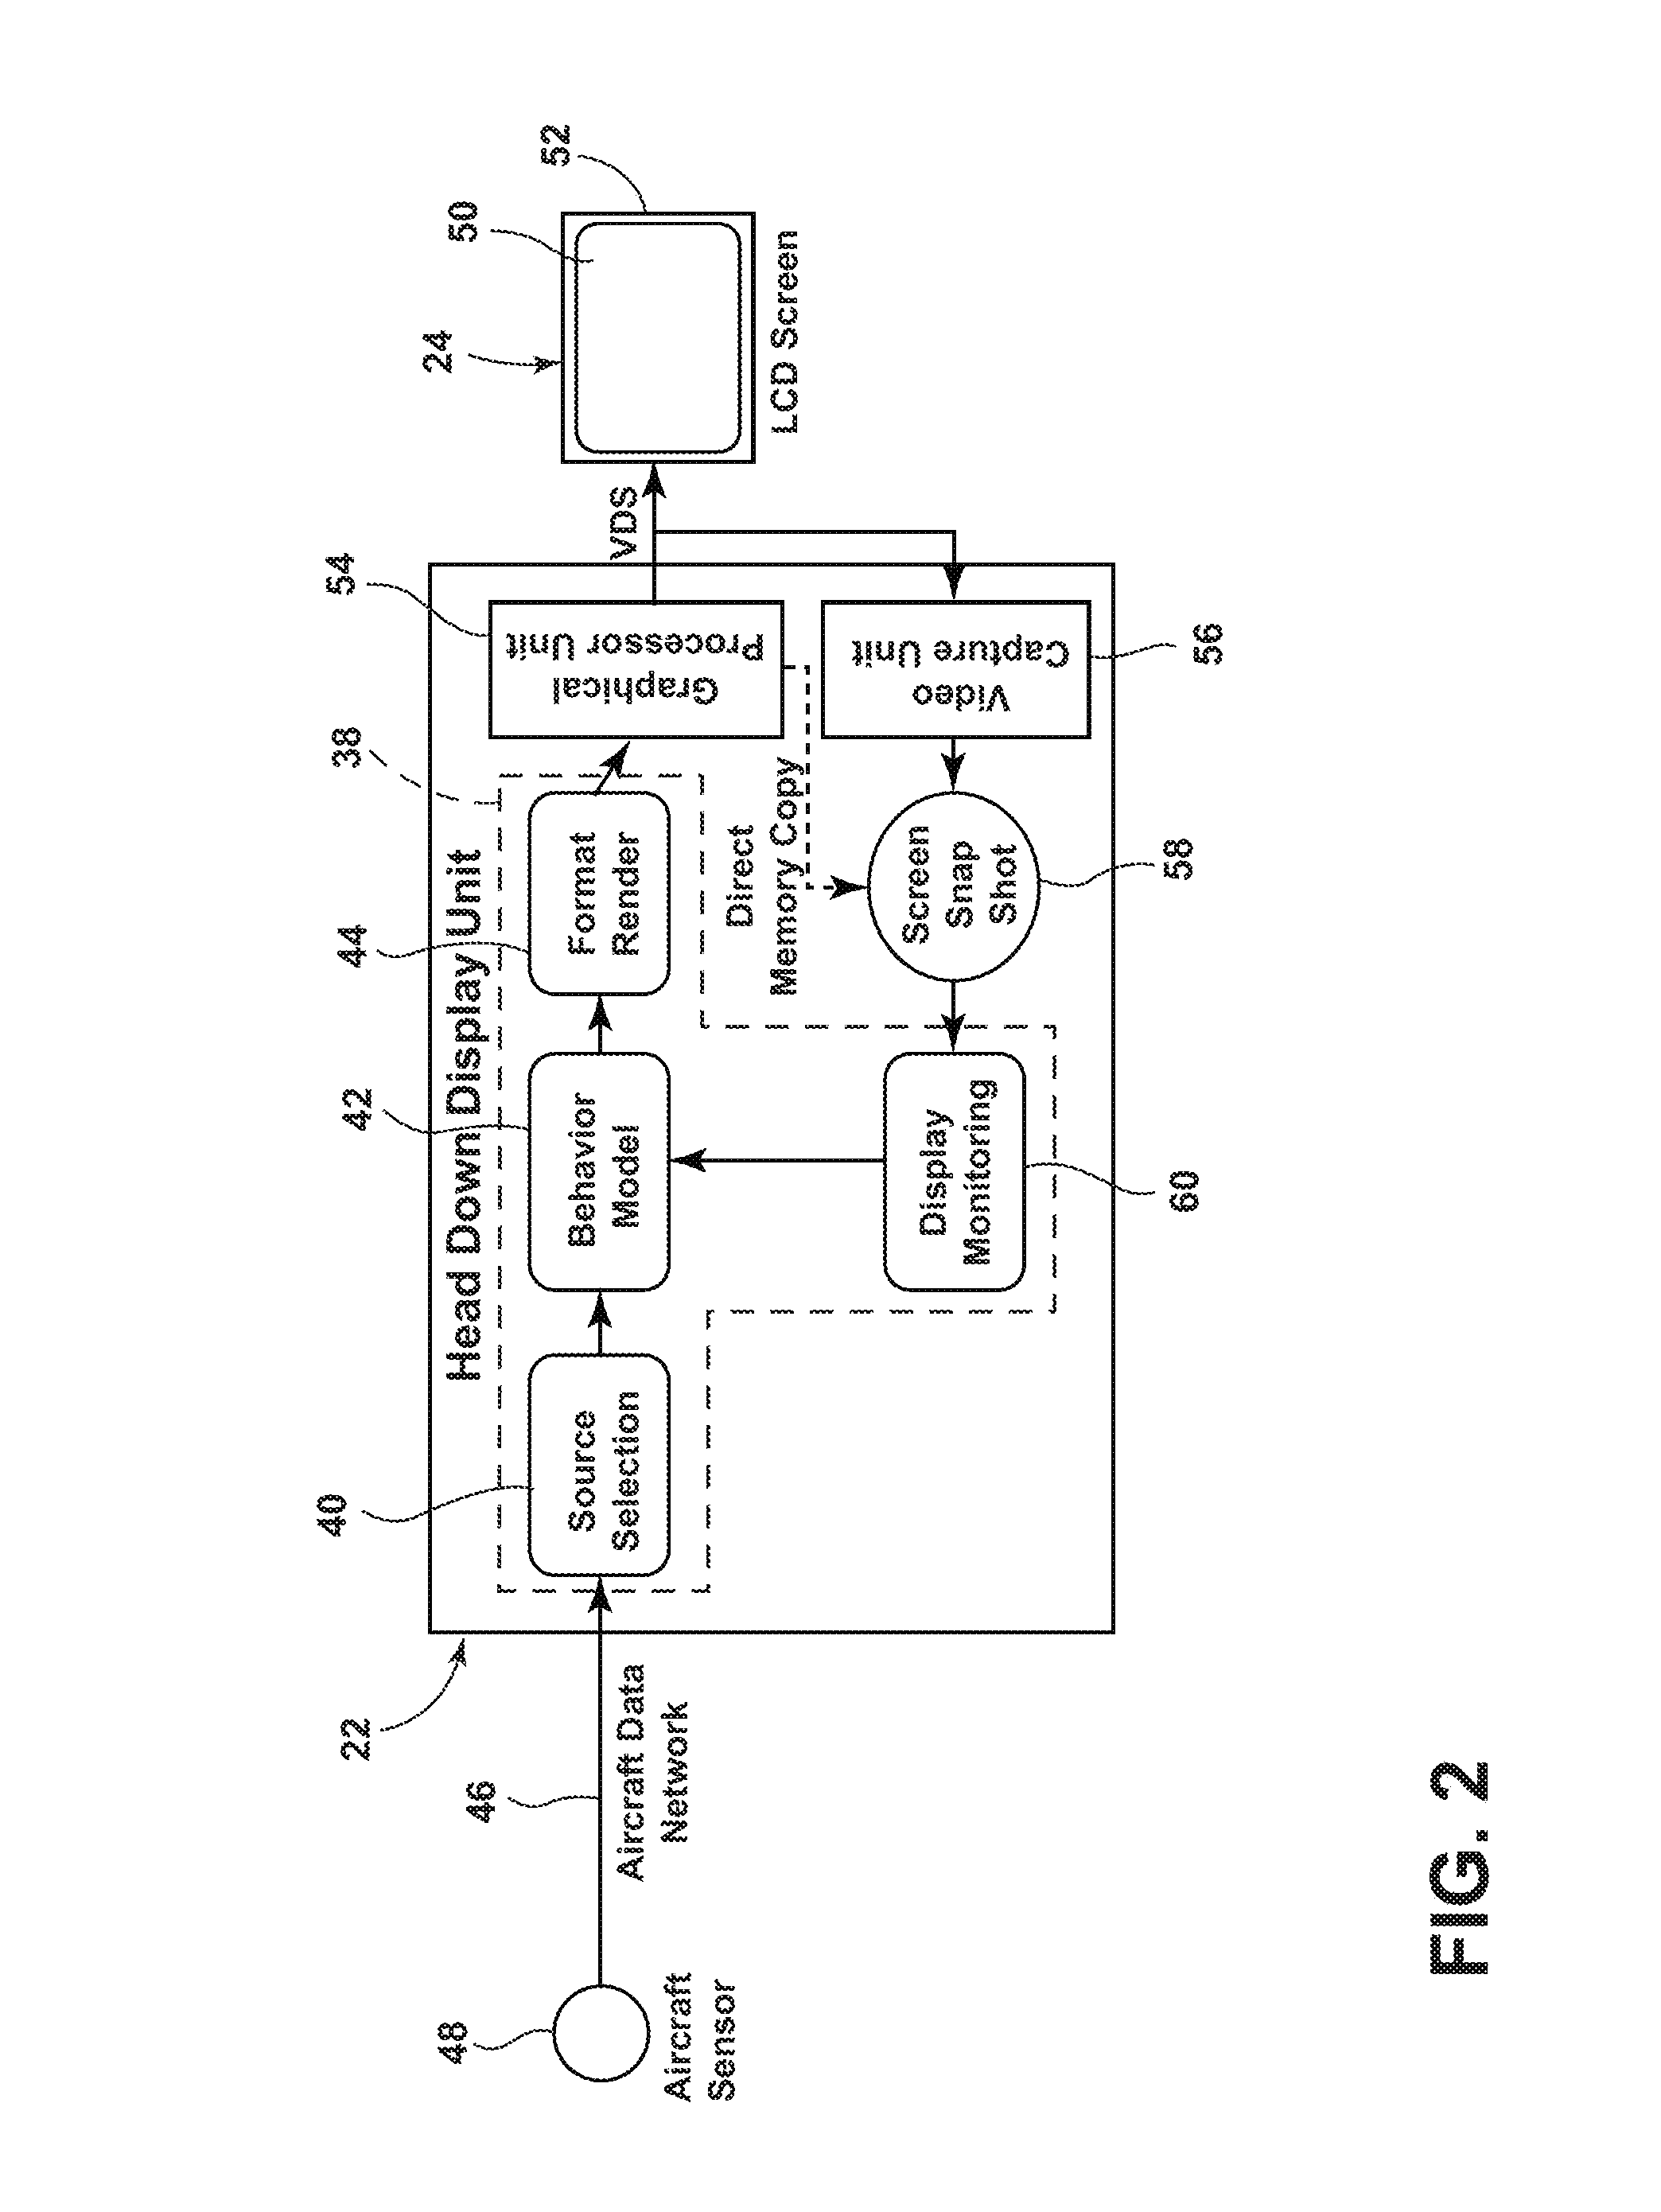 System and method of integrity checking digitally displayed data